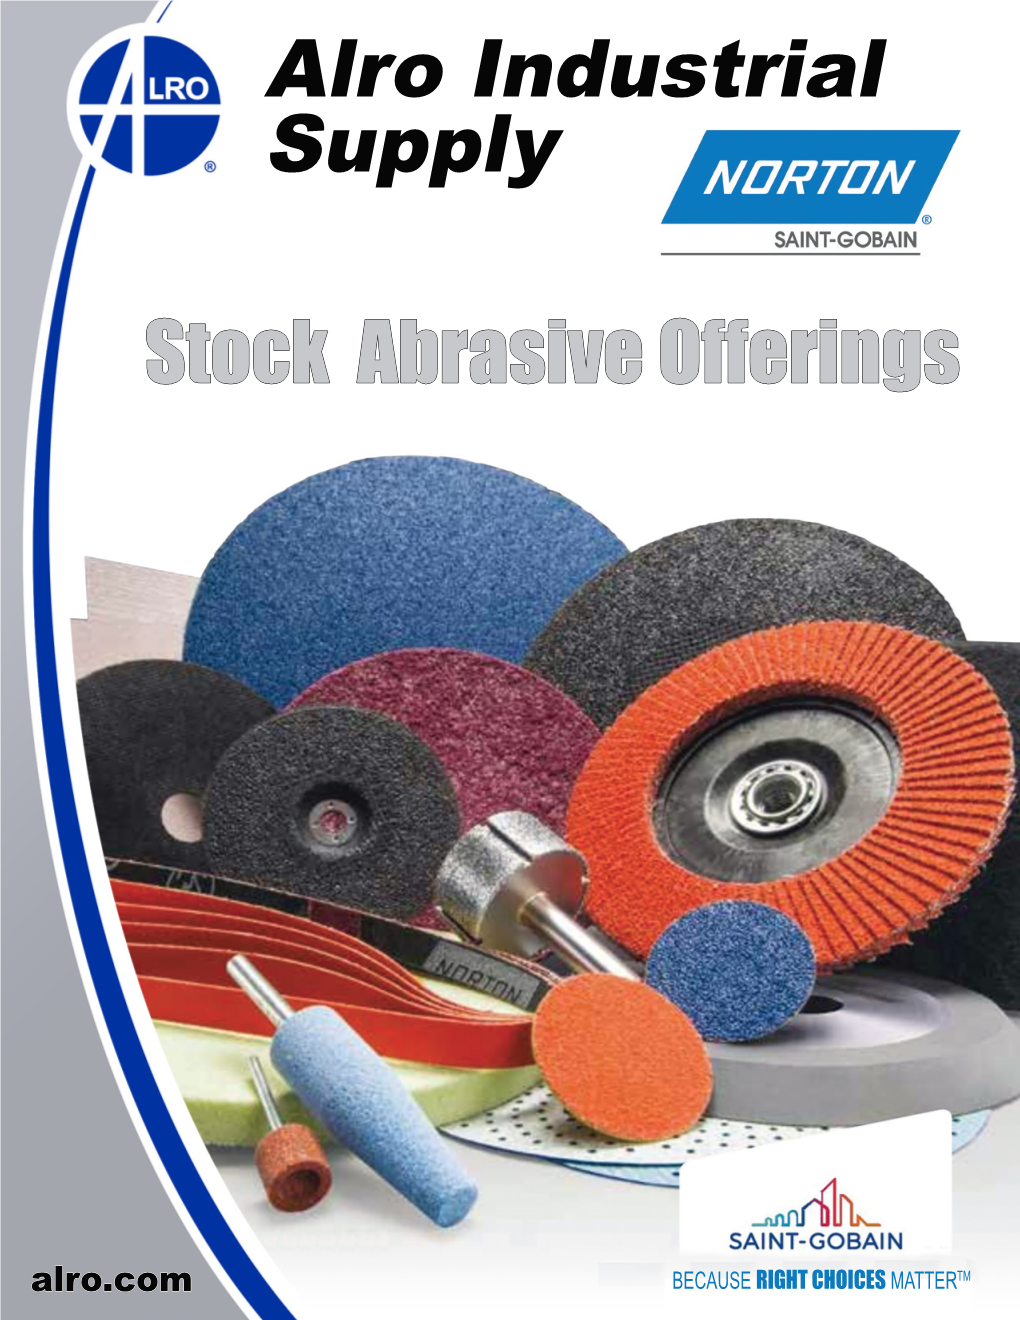 Norton Abrasive Products in Different Specifications for a Broad Range of Applications from Heavy Duty to Light Finishing